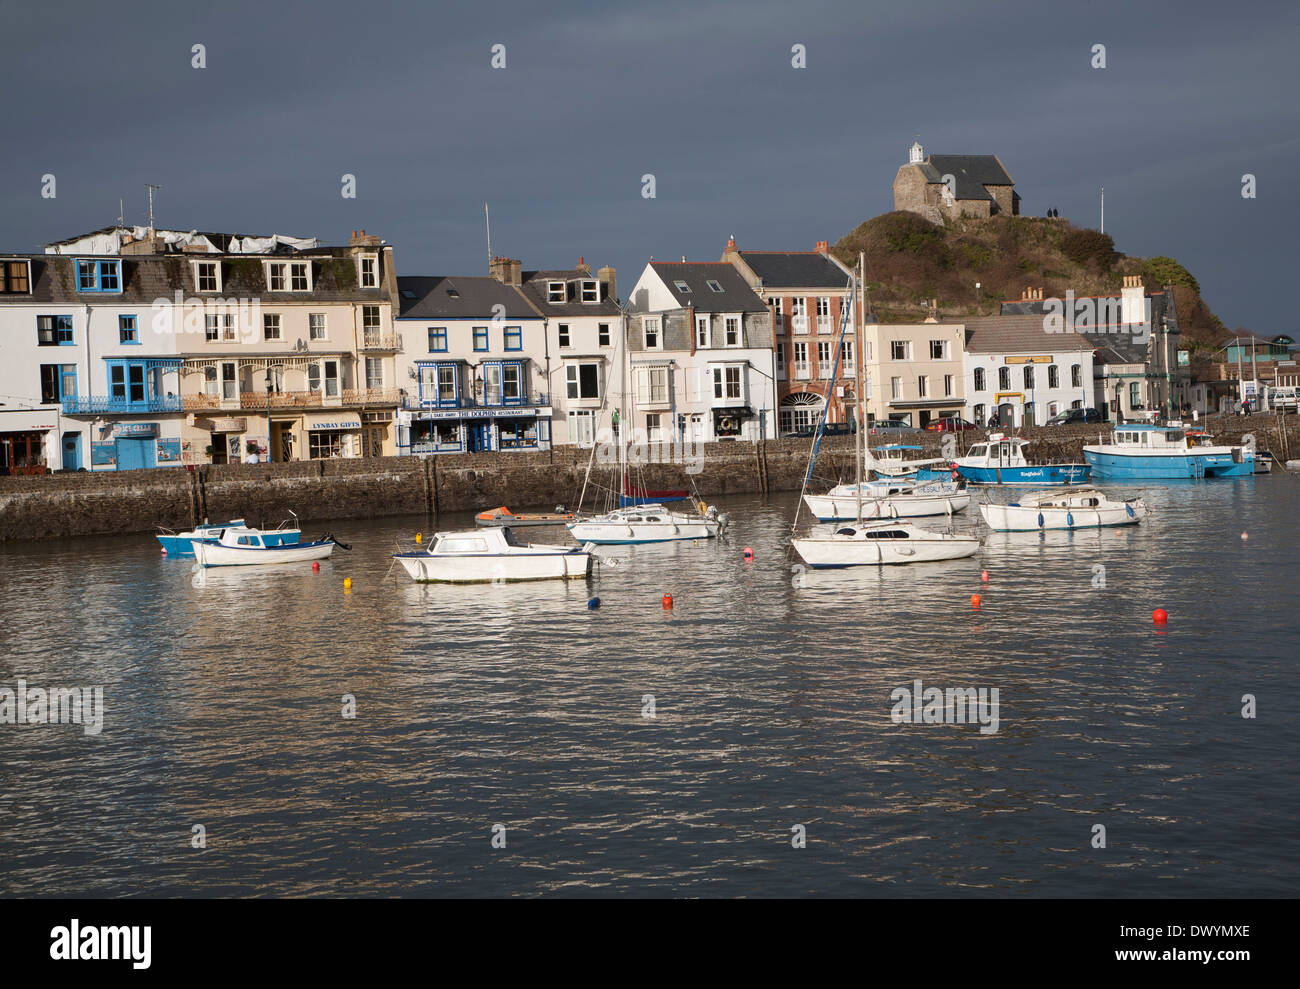 View of boats in the harbour in sunshine of winter afternoon, Ilfracombe, north Devon, England Stock Photo